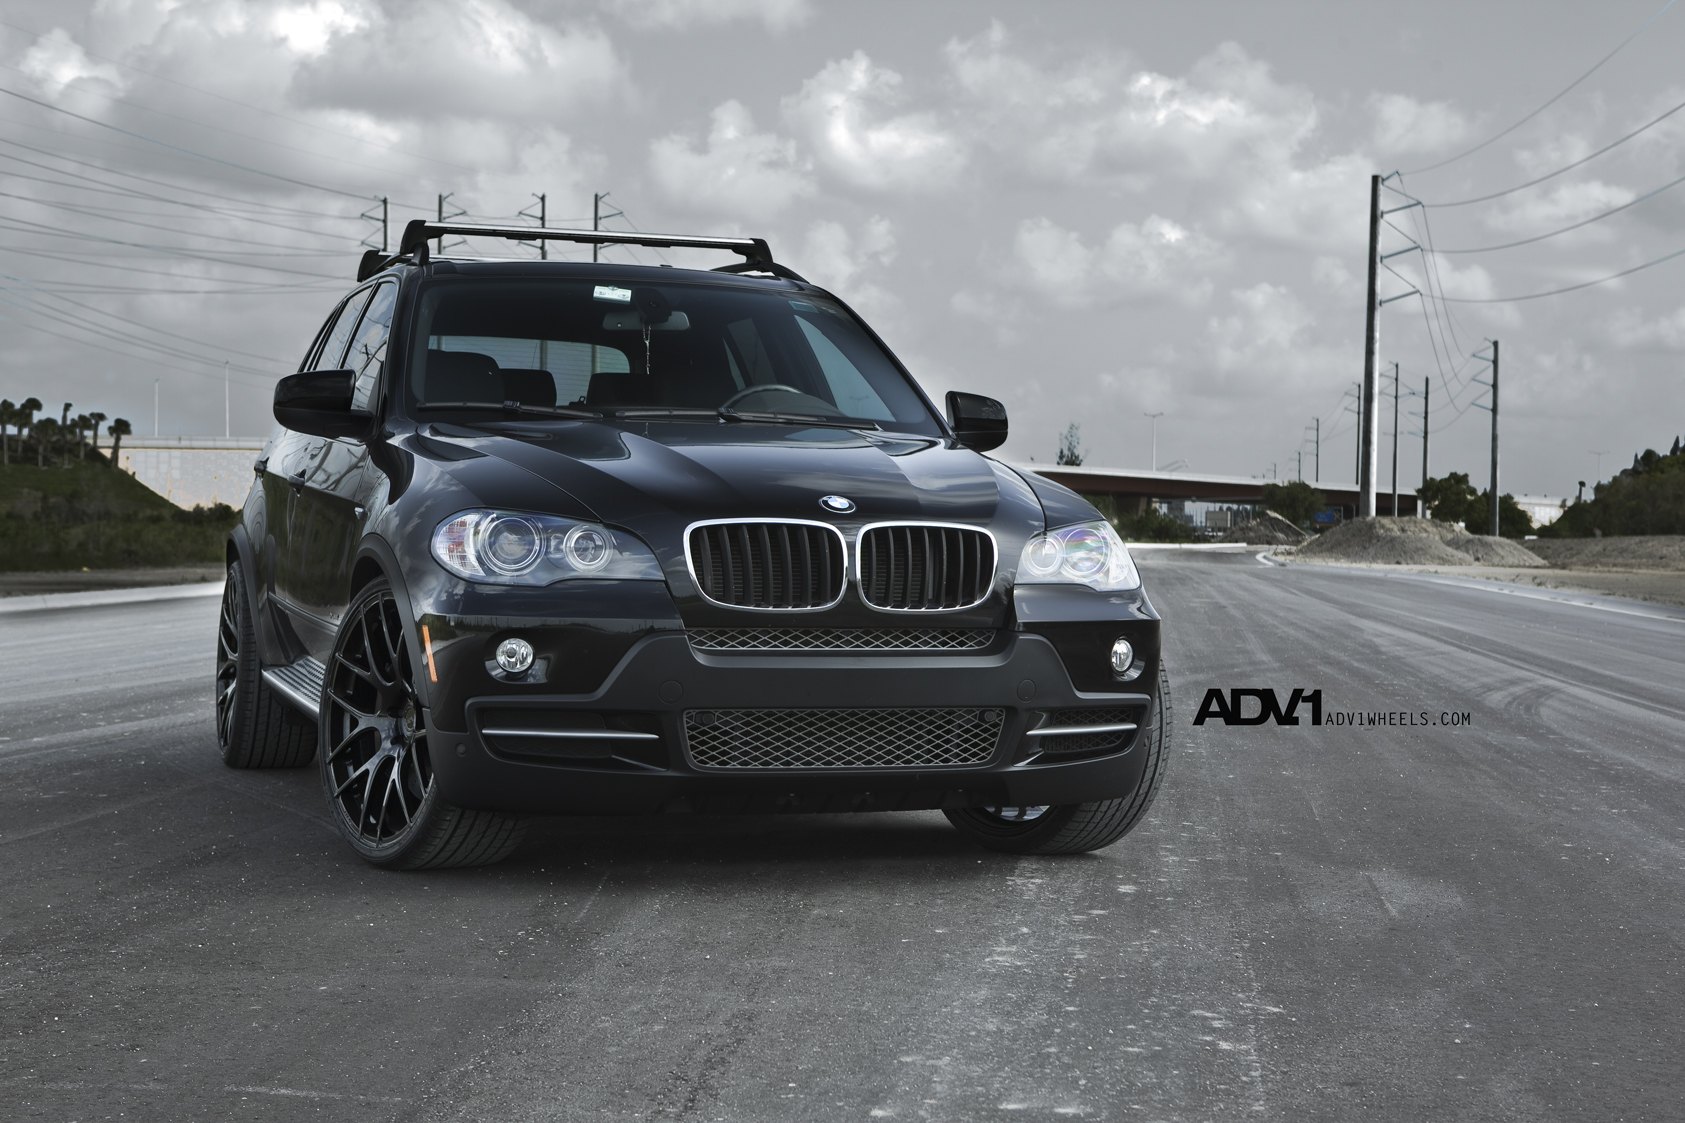 Black BMW X5 with ADV7 Concave Wheels - Photo by ADV.1